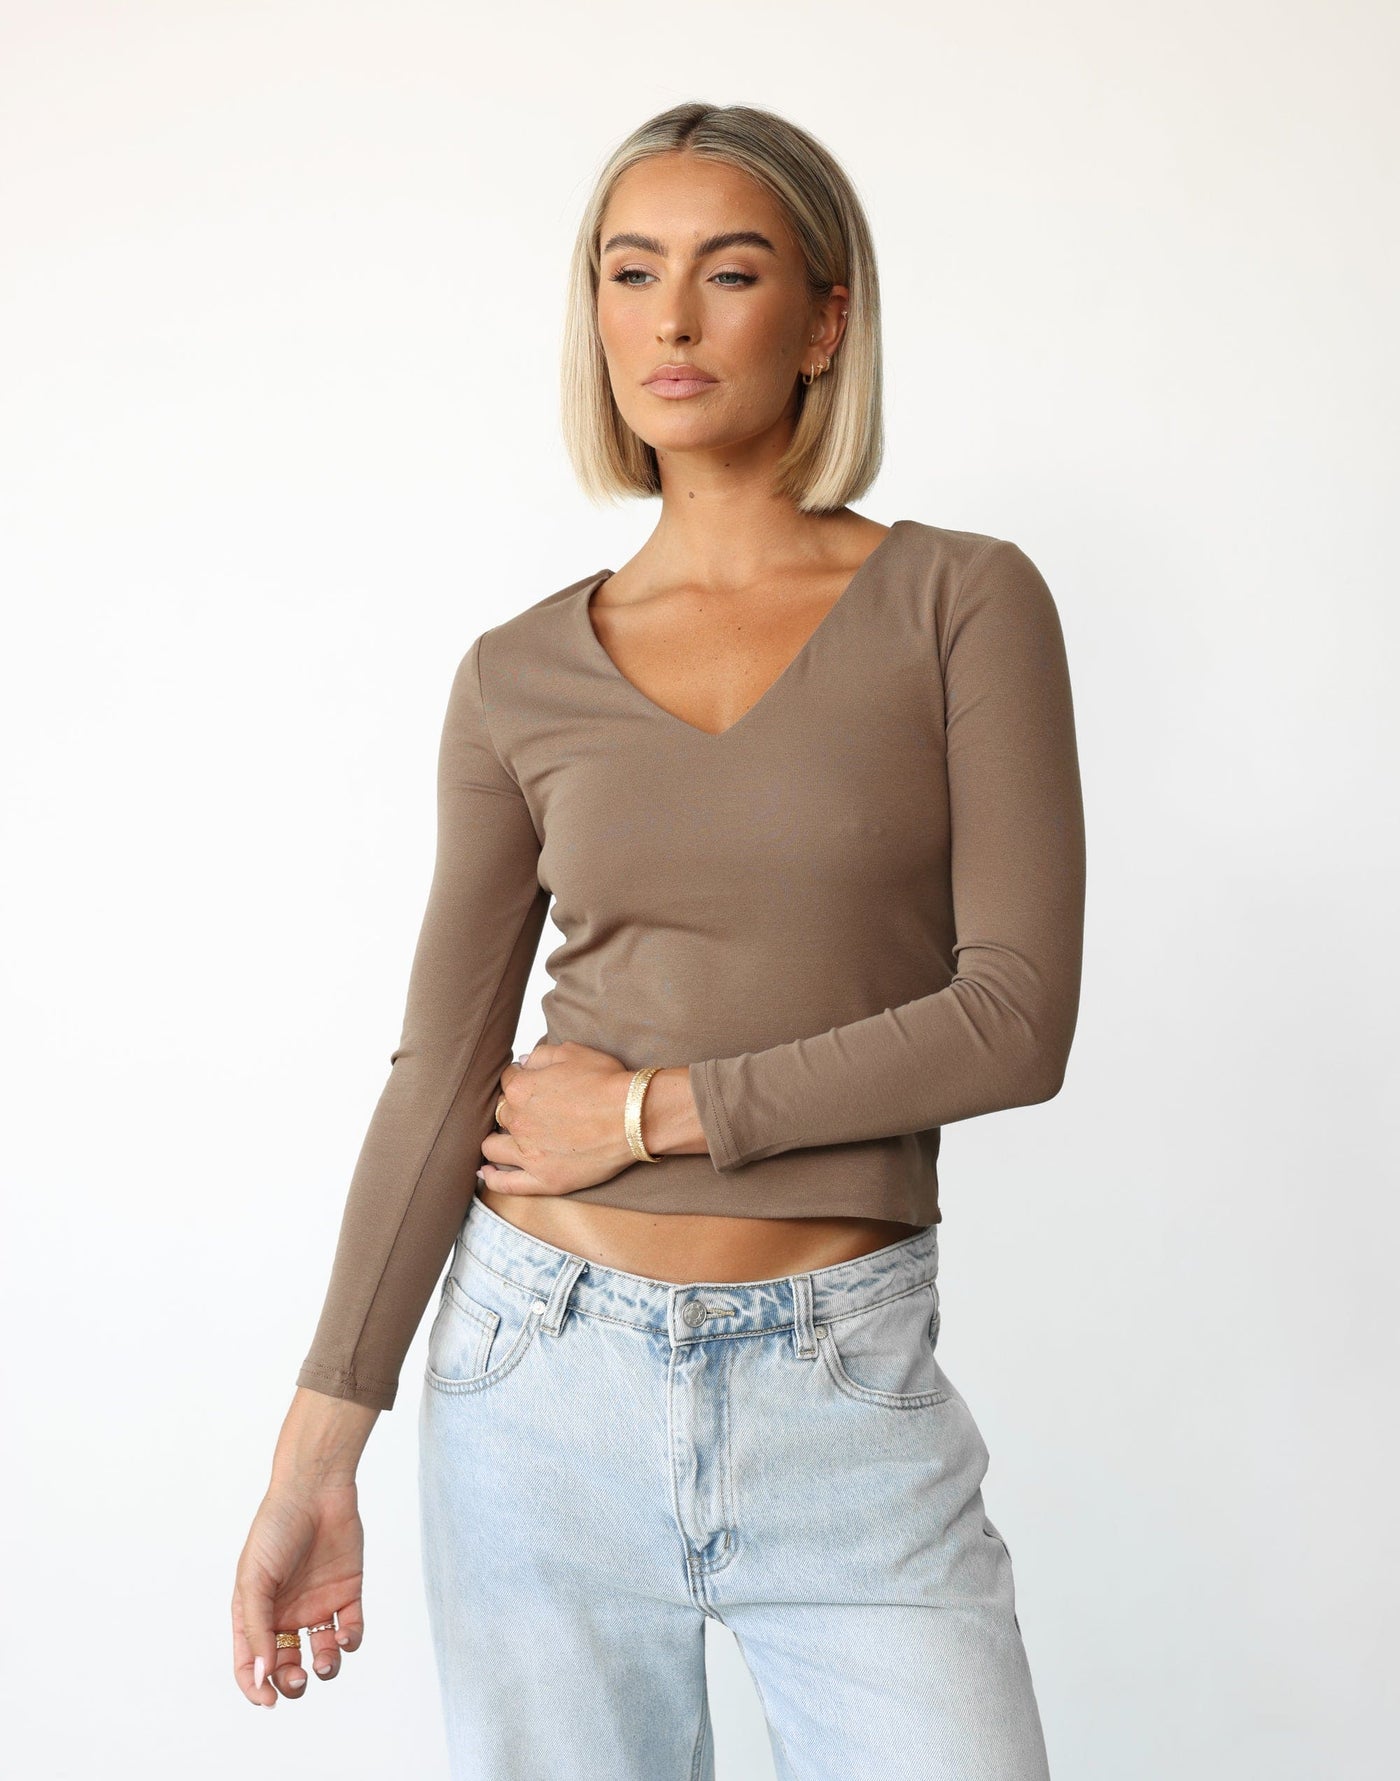 Diona Long Sleeve Top (Brown) - Brown Long Sleeve Top - Women's Top - Charcoal Clothing